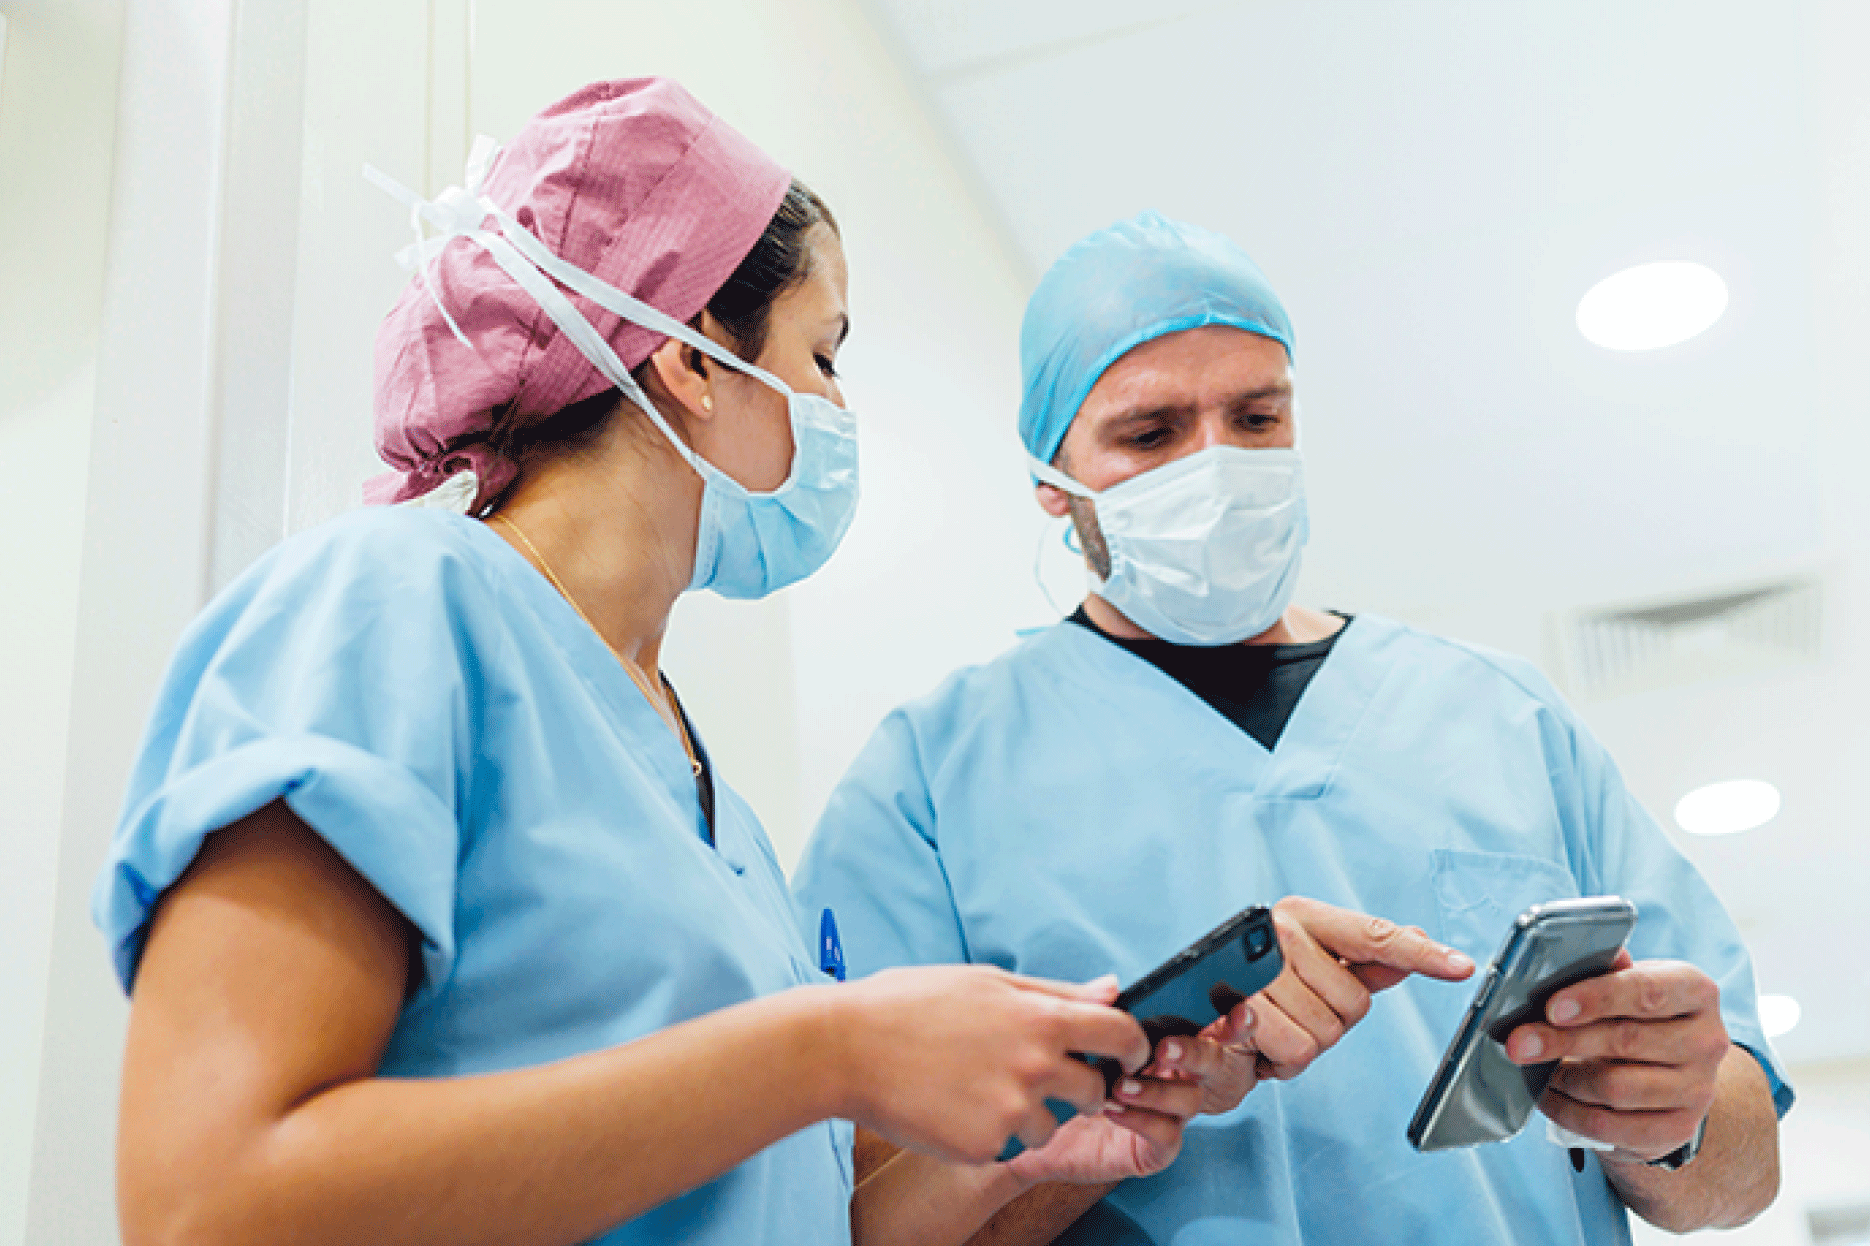 Male and female clinician in surgery scrubs looking at their mobile phones.